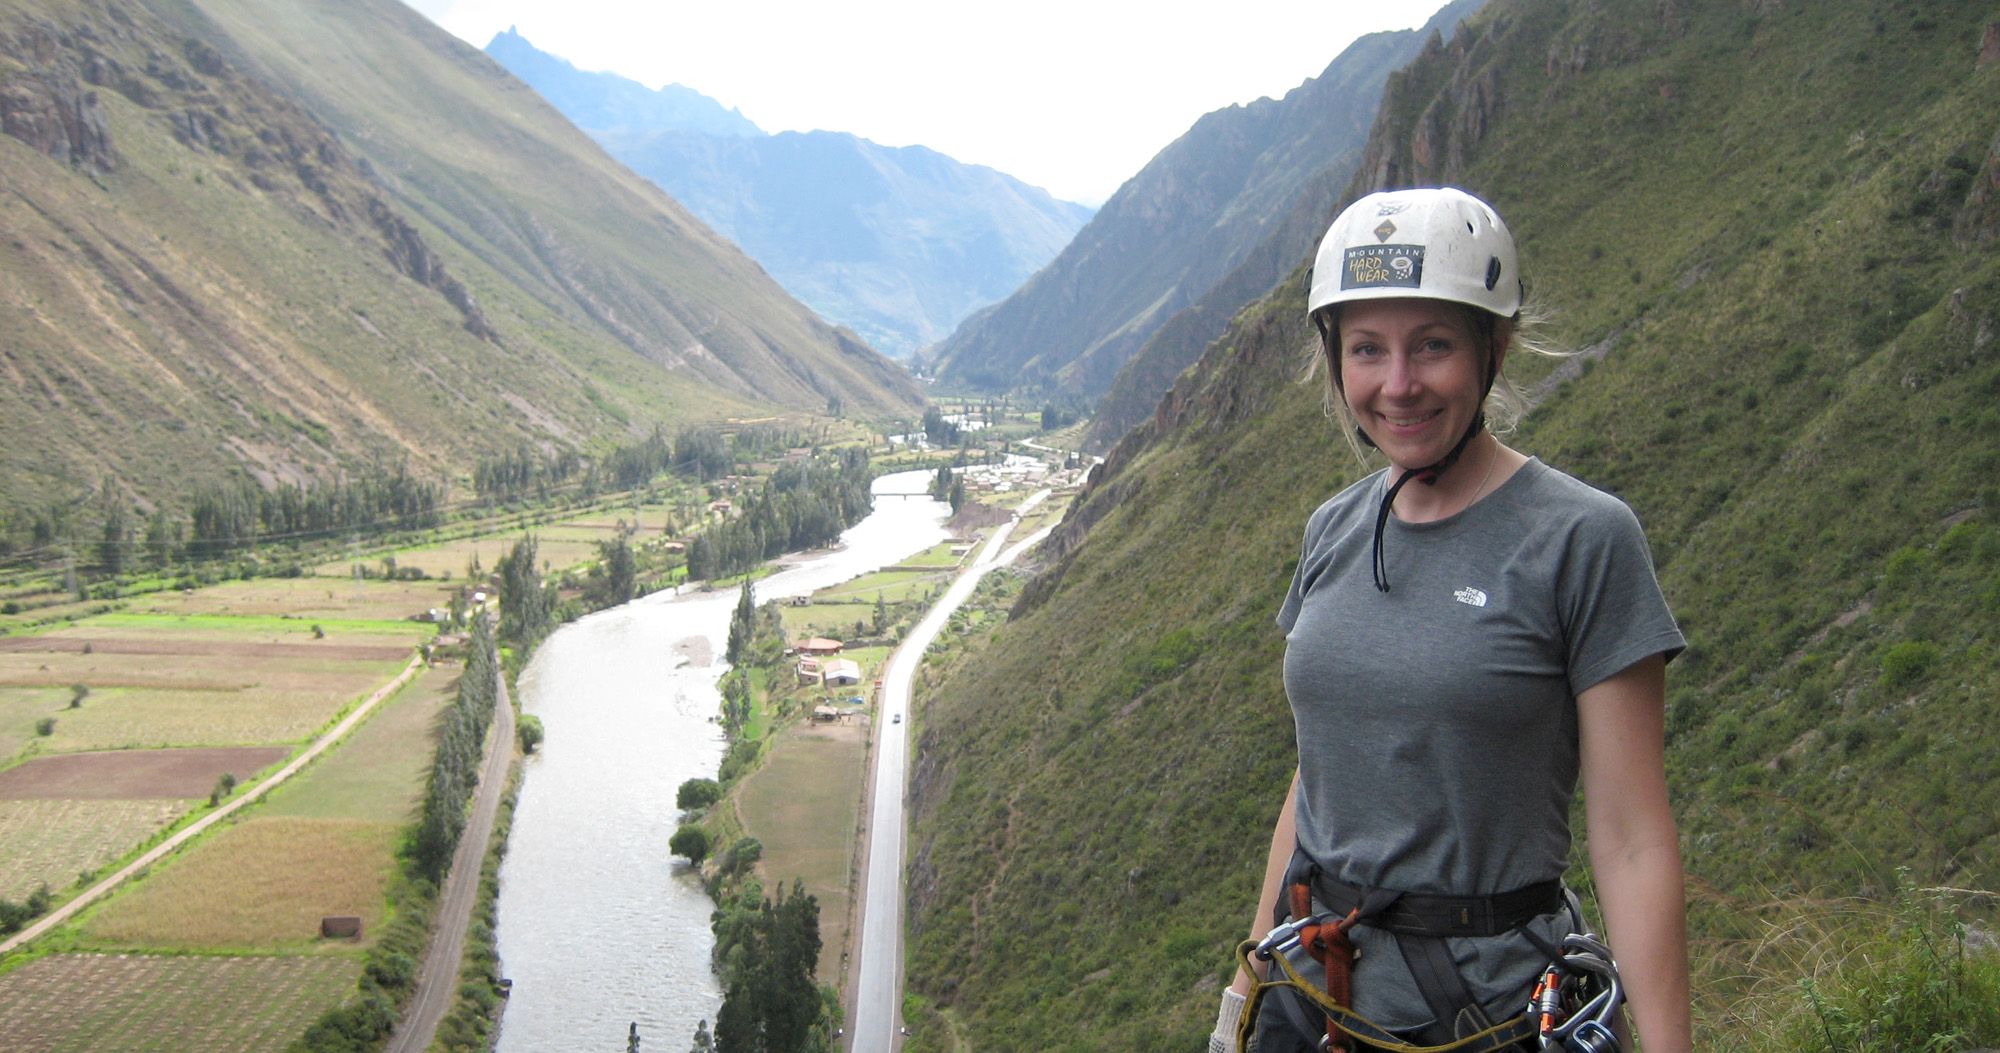 Featured image for “Rock Climbing and Zip Lining in the Urabamba River Valley, Peru”